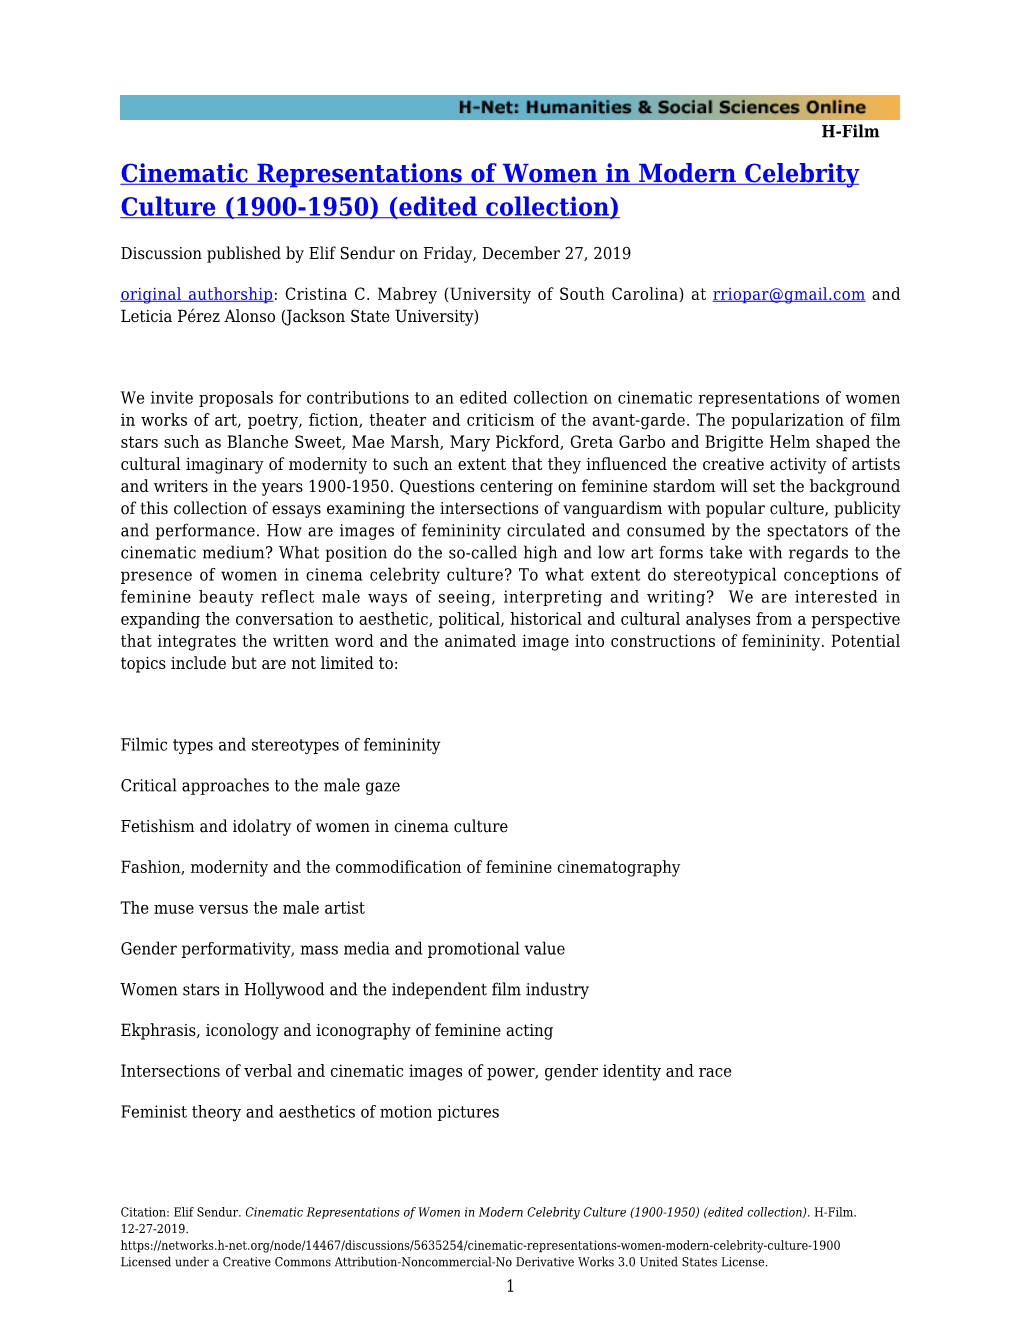 Cinematic Representations of Women in Modern Celebrity Culture (1900-1950) (Edited Collection)